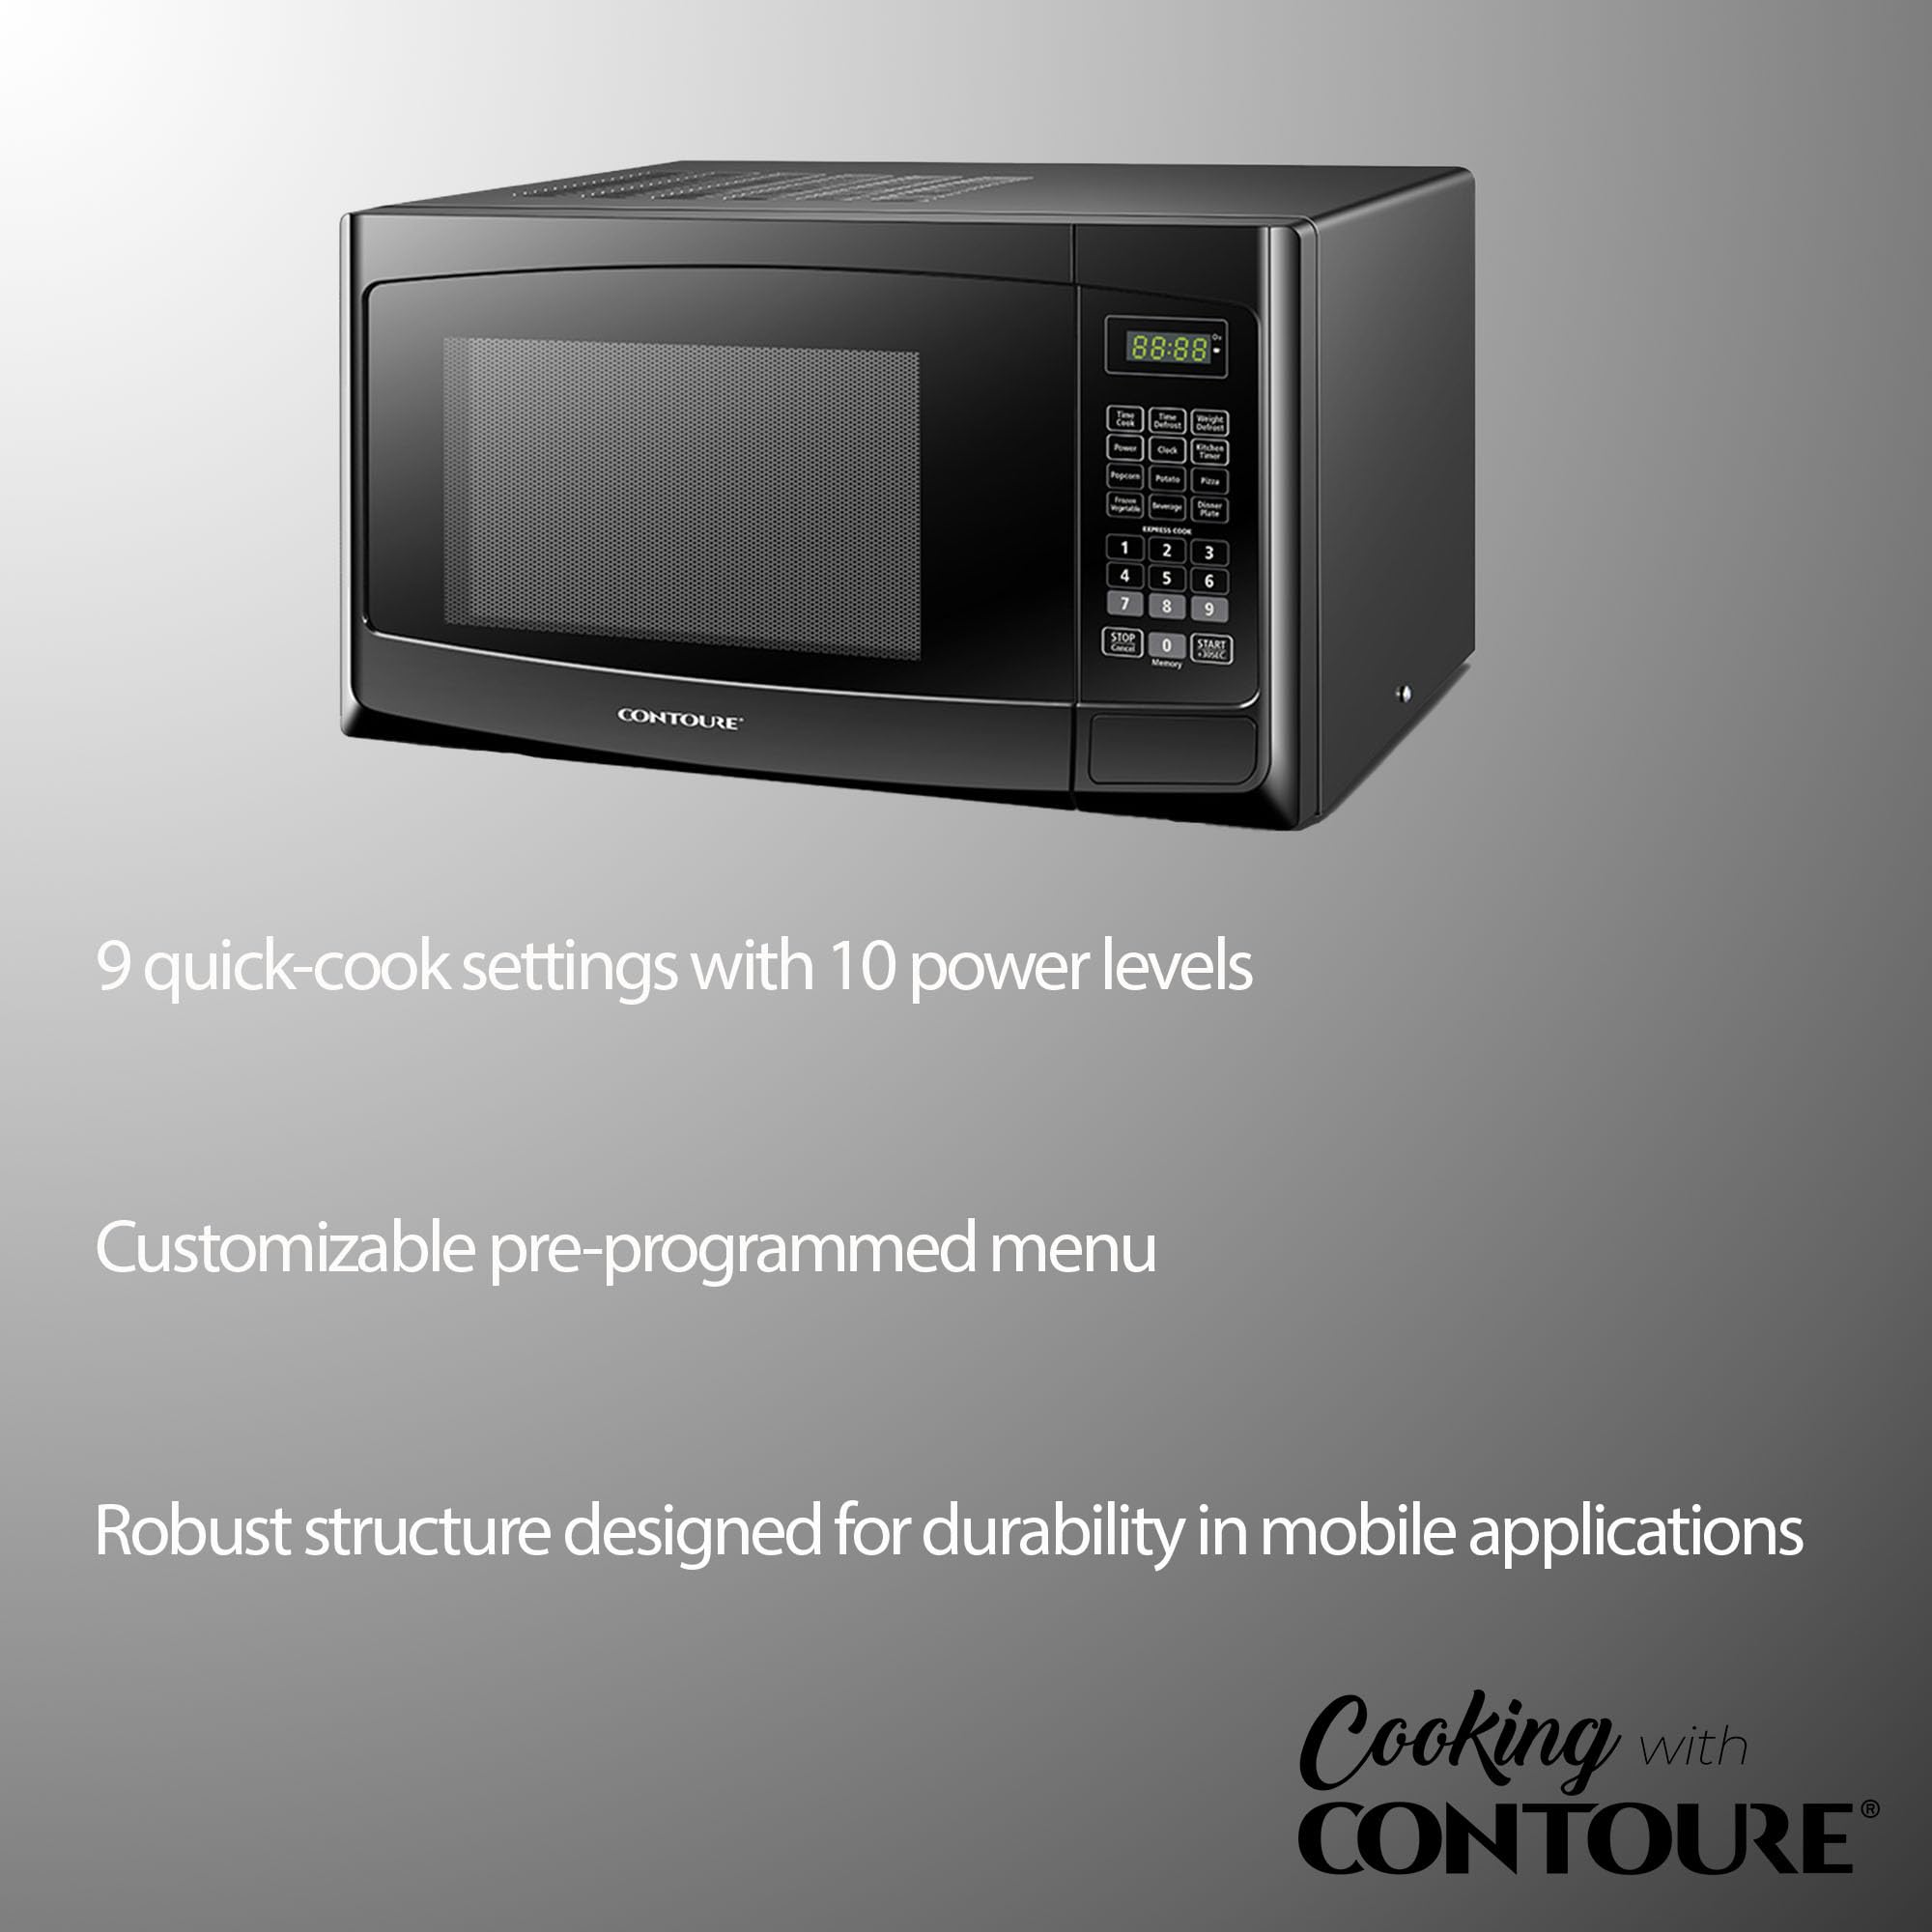 CONTOURE RV Built-In Microwave Oven | Perfect RV Replacement | 900W Power, 10 Power Levels | Easy-Clean Interior | LED Display | Quick-Cook Settings | RV-980B